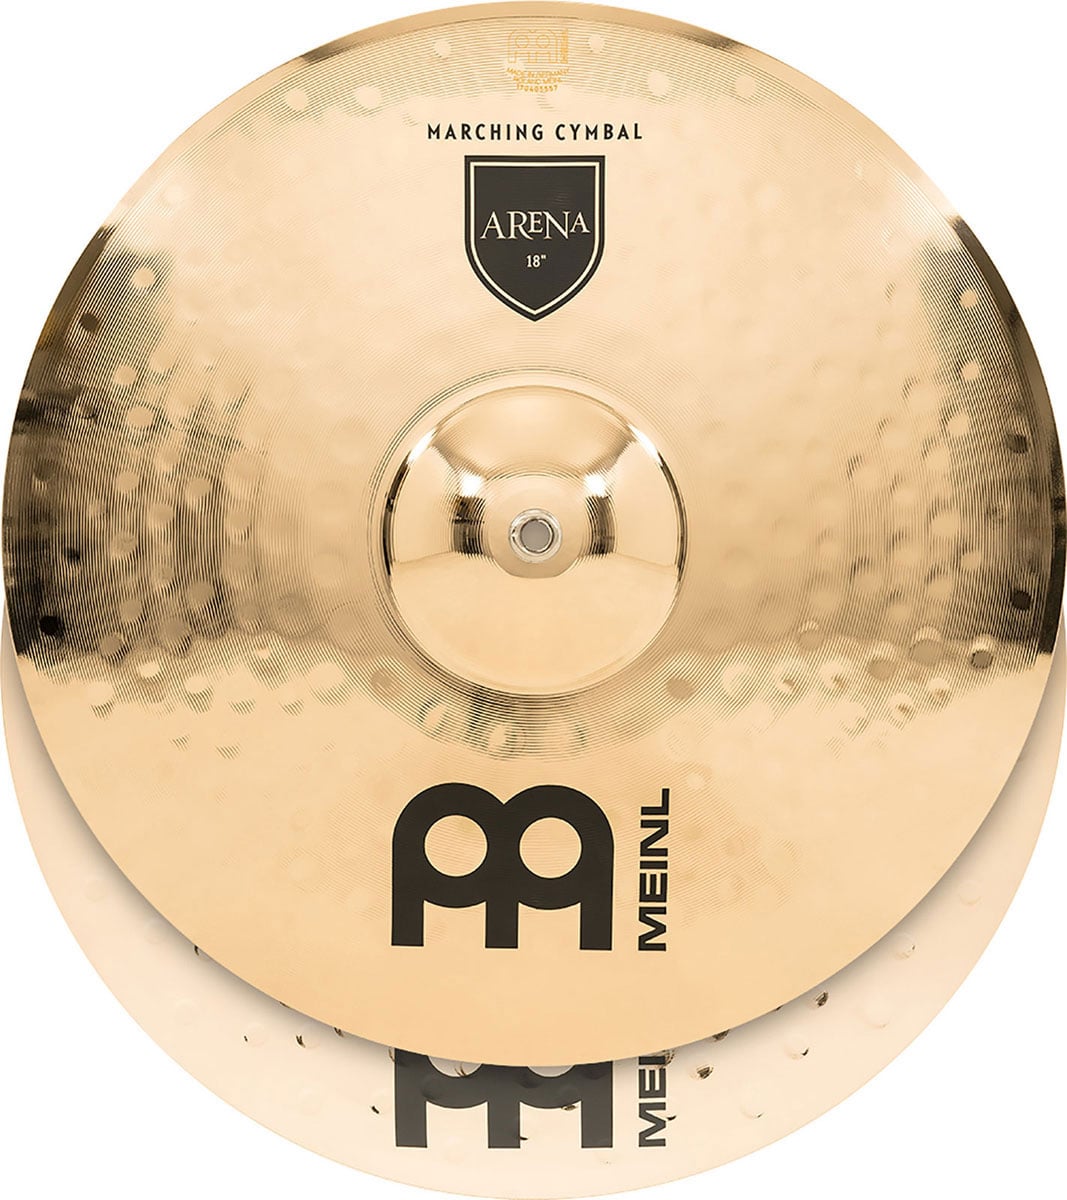 MEINL MA-AR-18 - PAIRE CYMBALES MARCHING ARENA 18